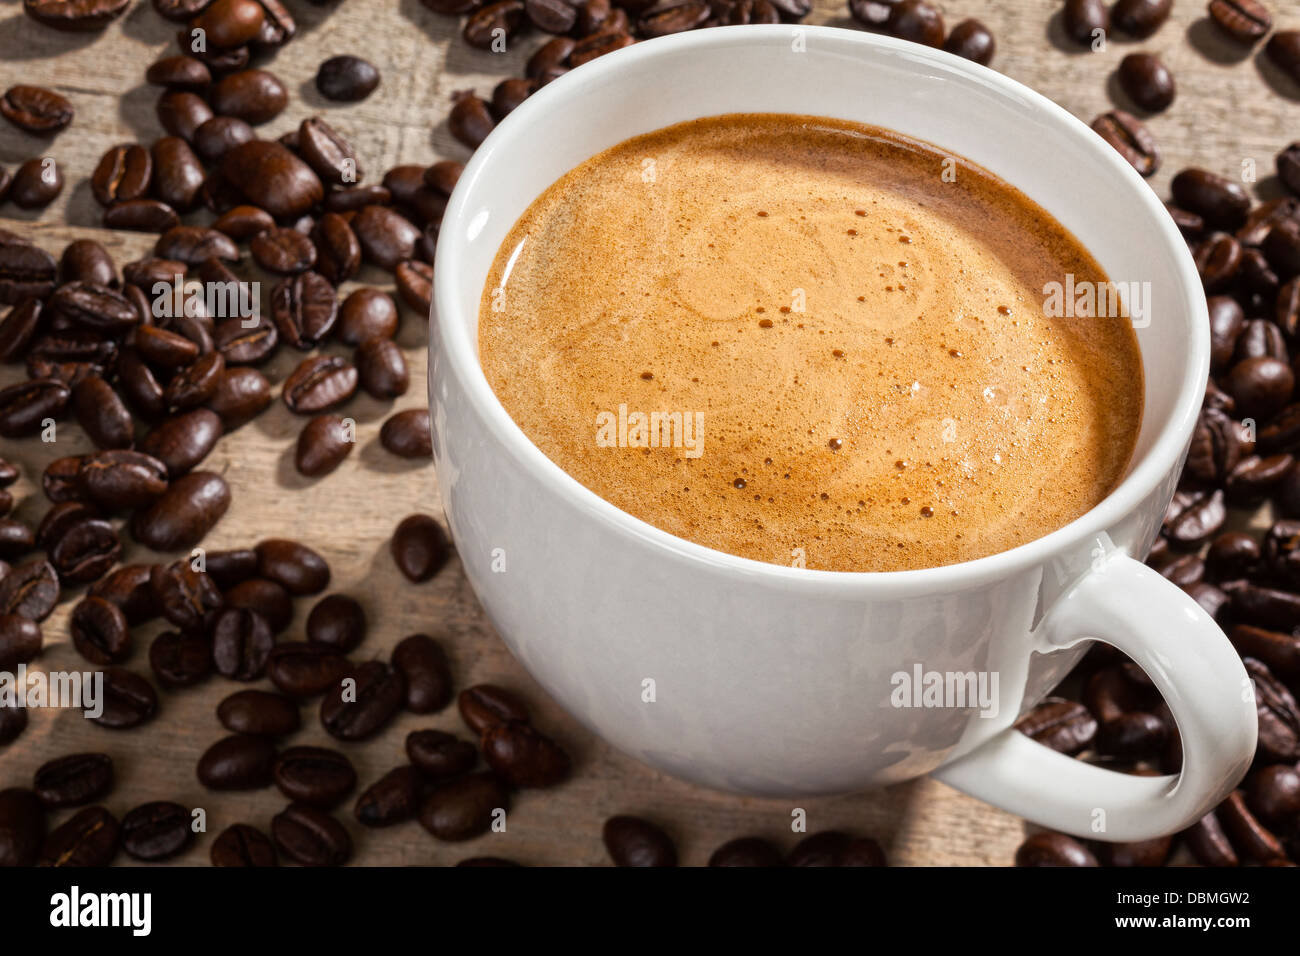 Espresso Coffee and Coffee Beans - a cup of espresso on a rustic background with coffee beans. Focus on coffee. Stock Photo